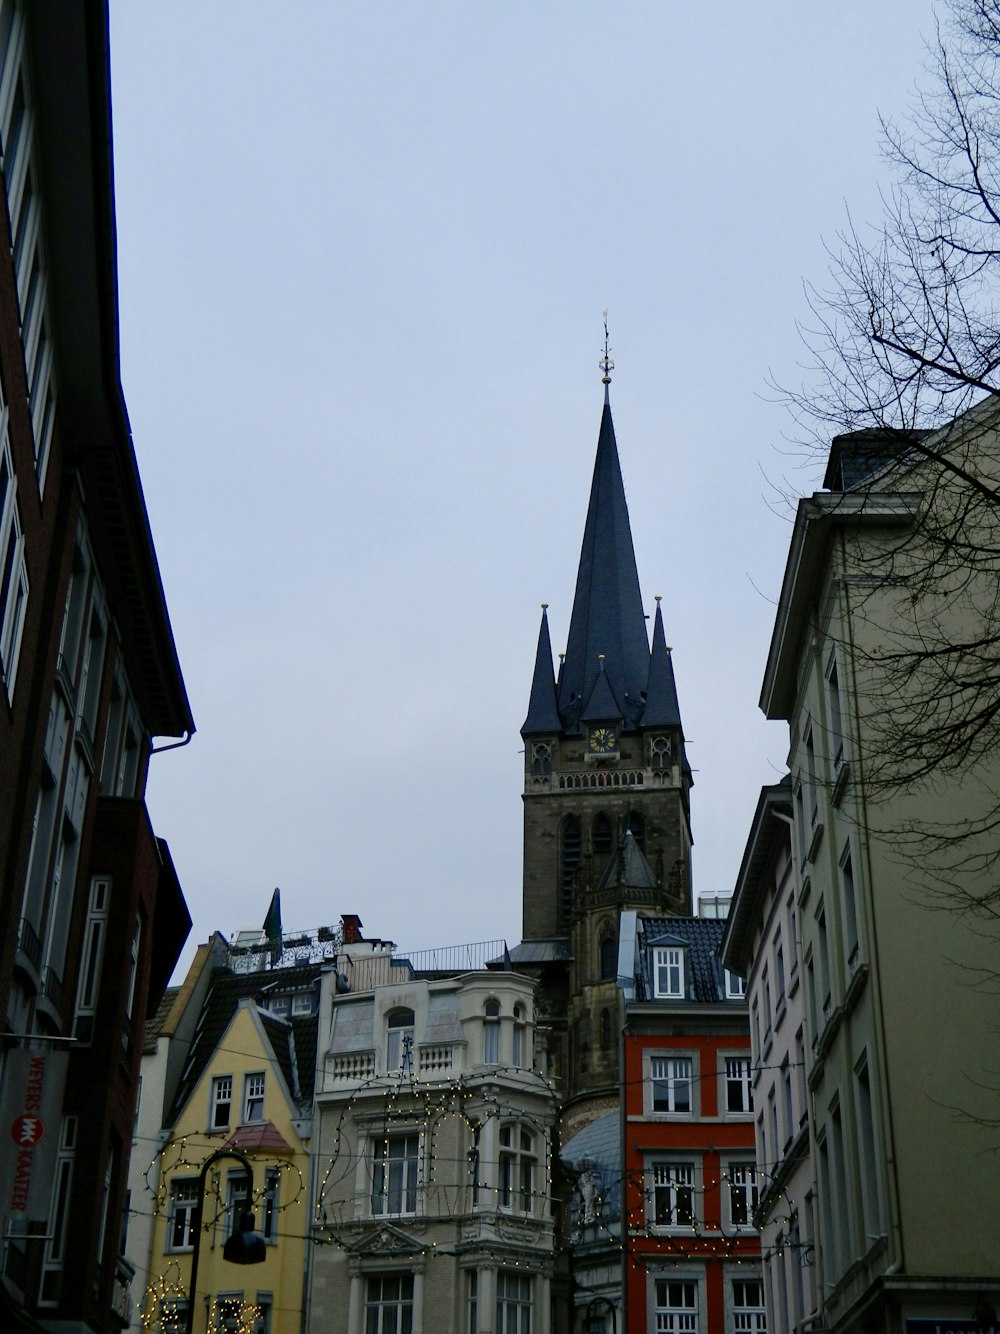 a group of buildings with a steeple